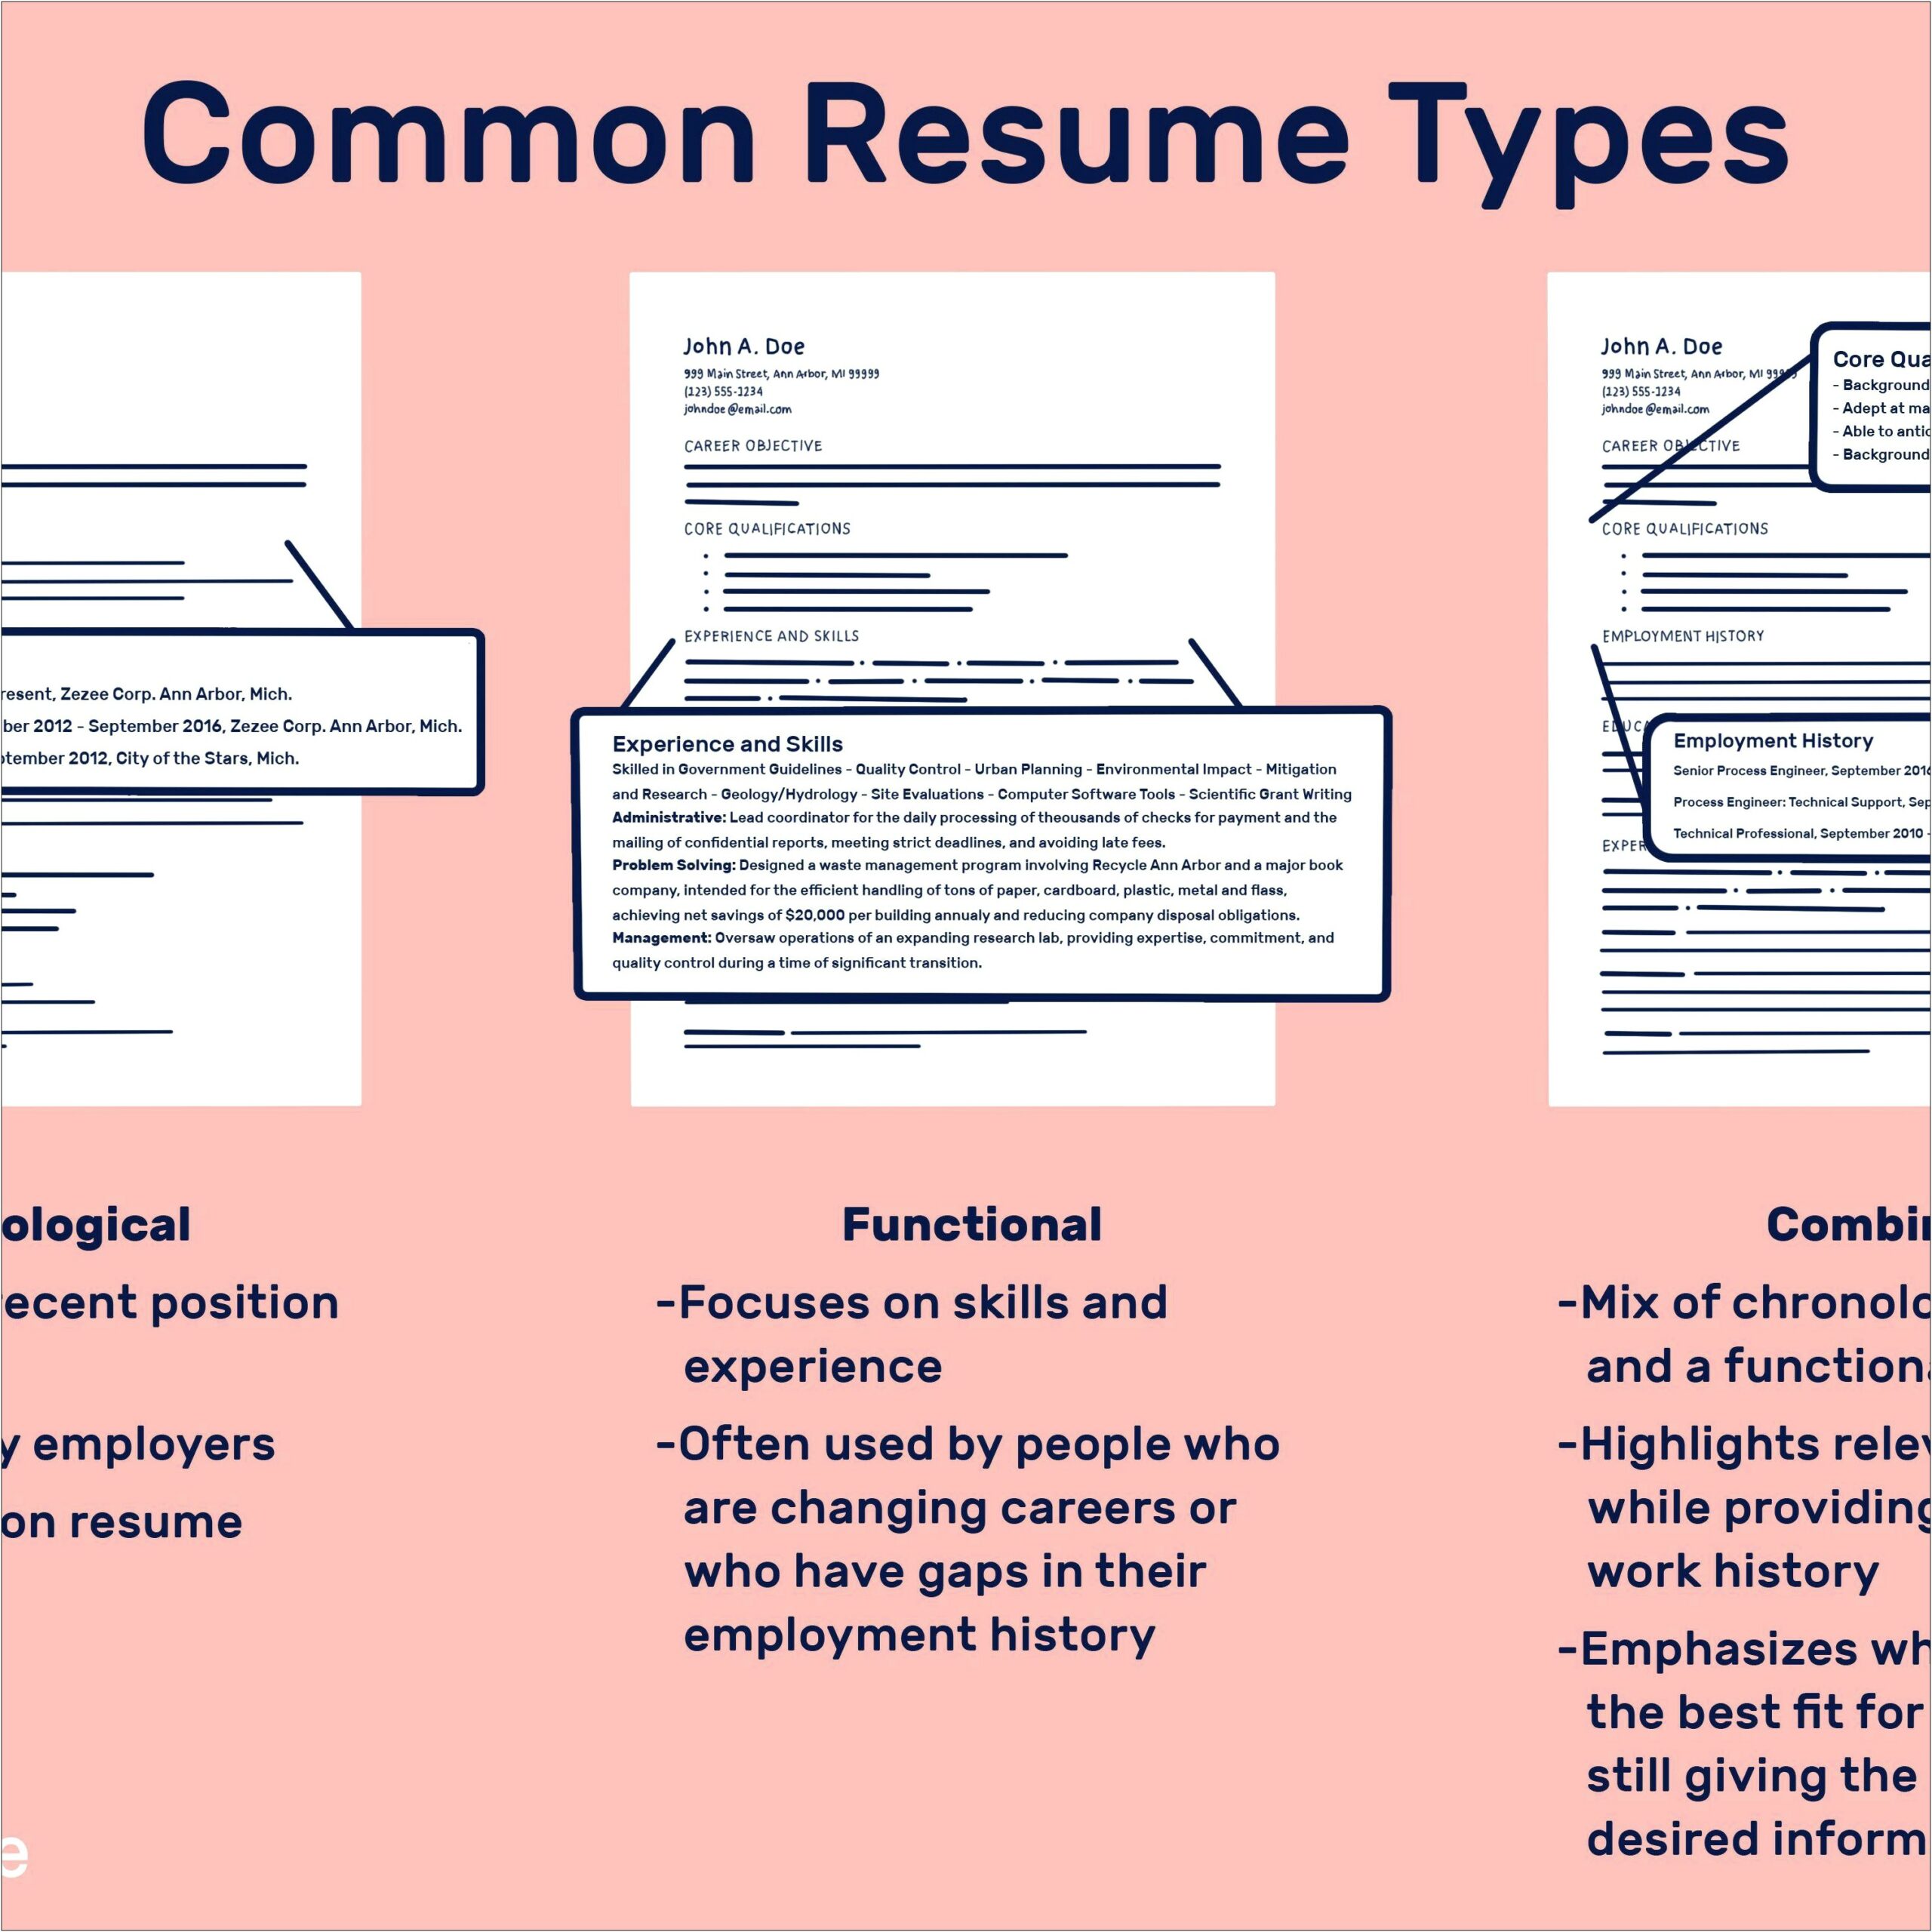 Skills And Abilities In A Functional Resume